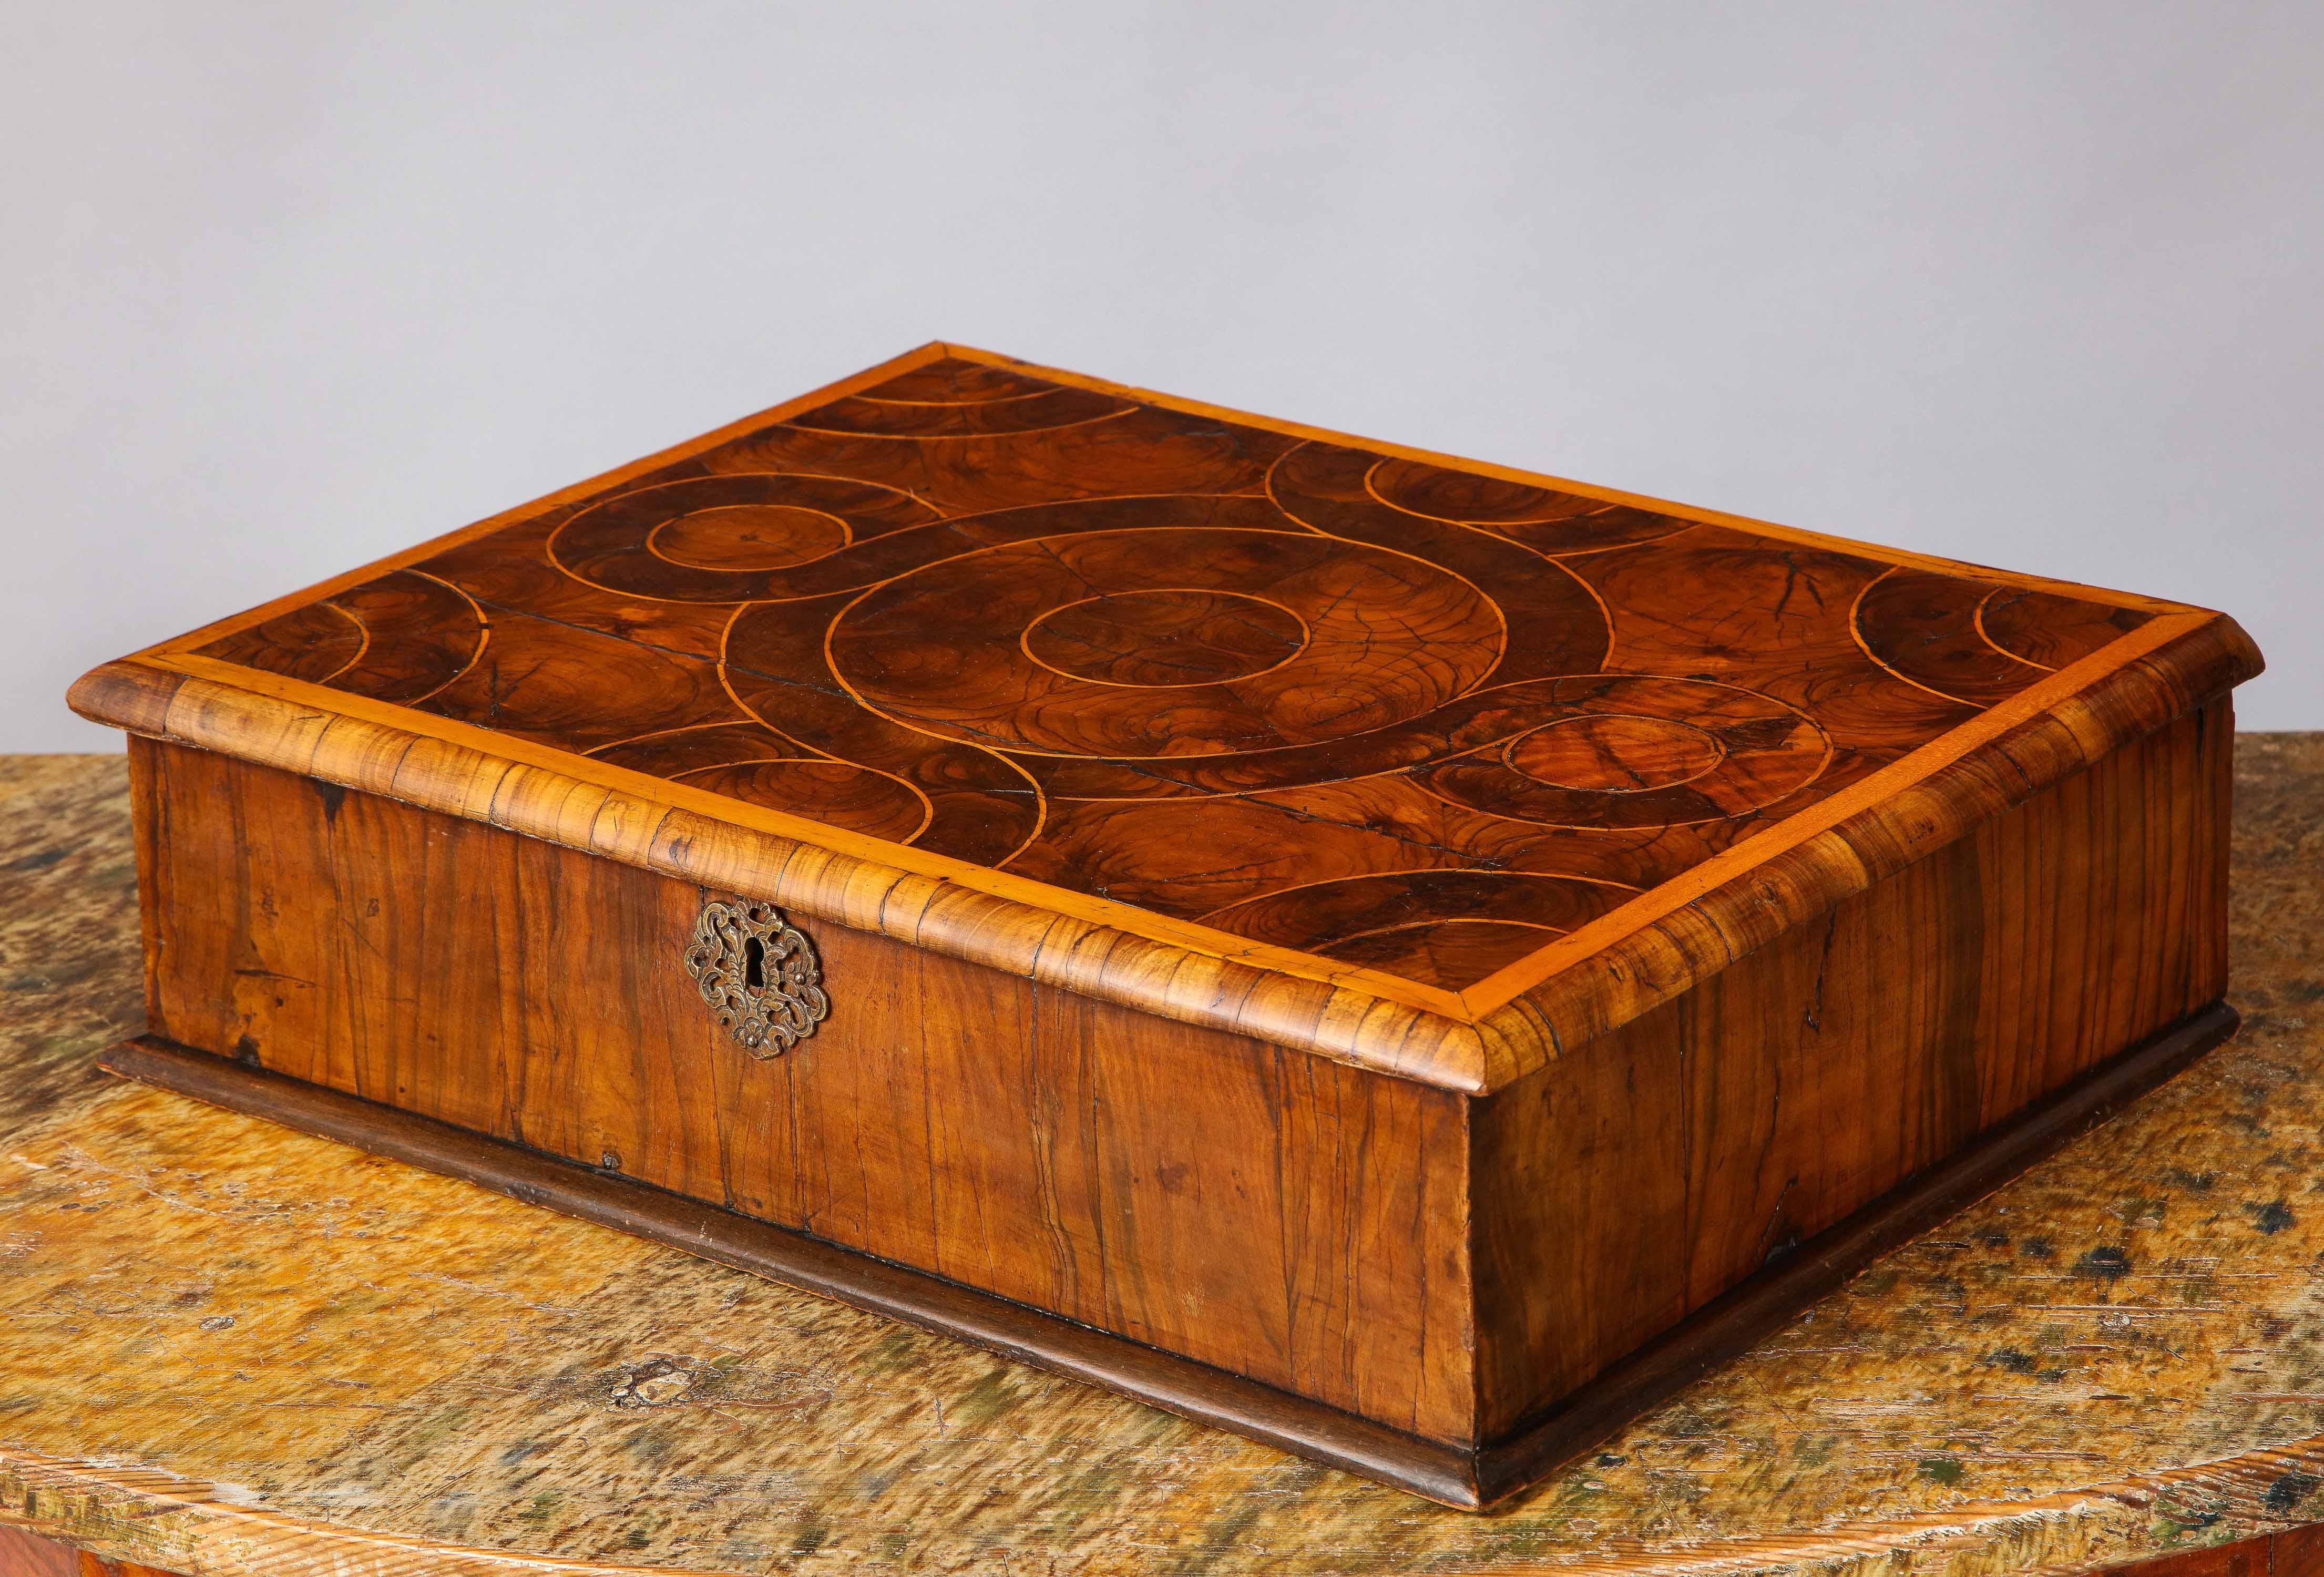 Very fine William and Mary period English walnut oyster veneered glove or document box with geometrically patterned oysters with boxwood inlay, old painted interior surface, possessing good rich color and patination.
 